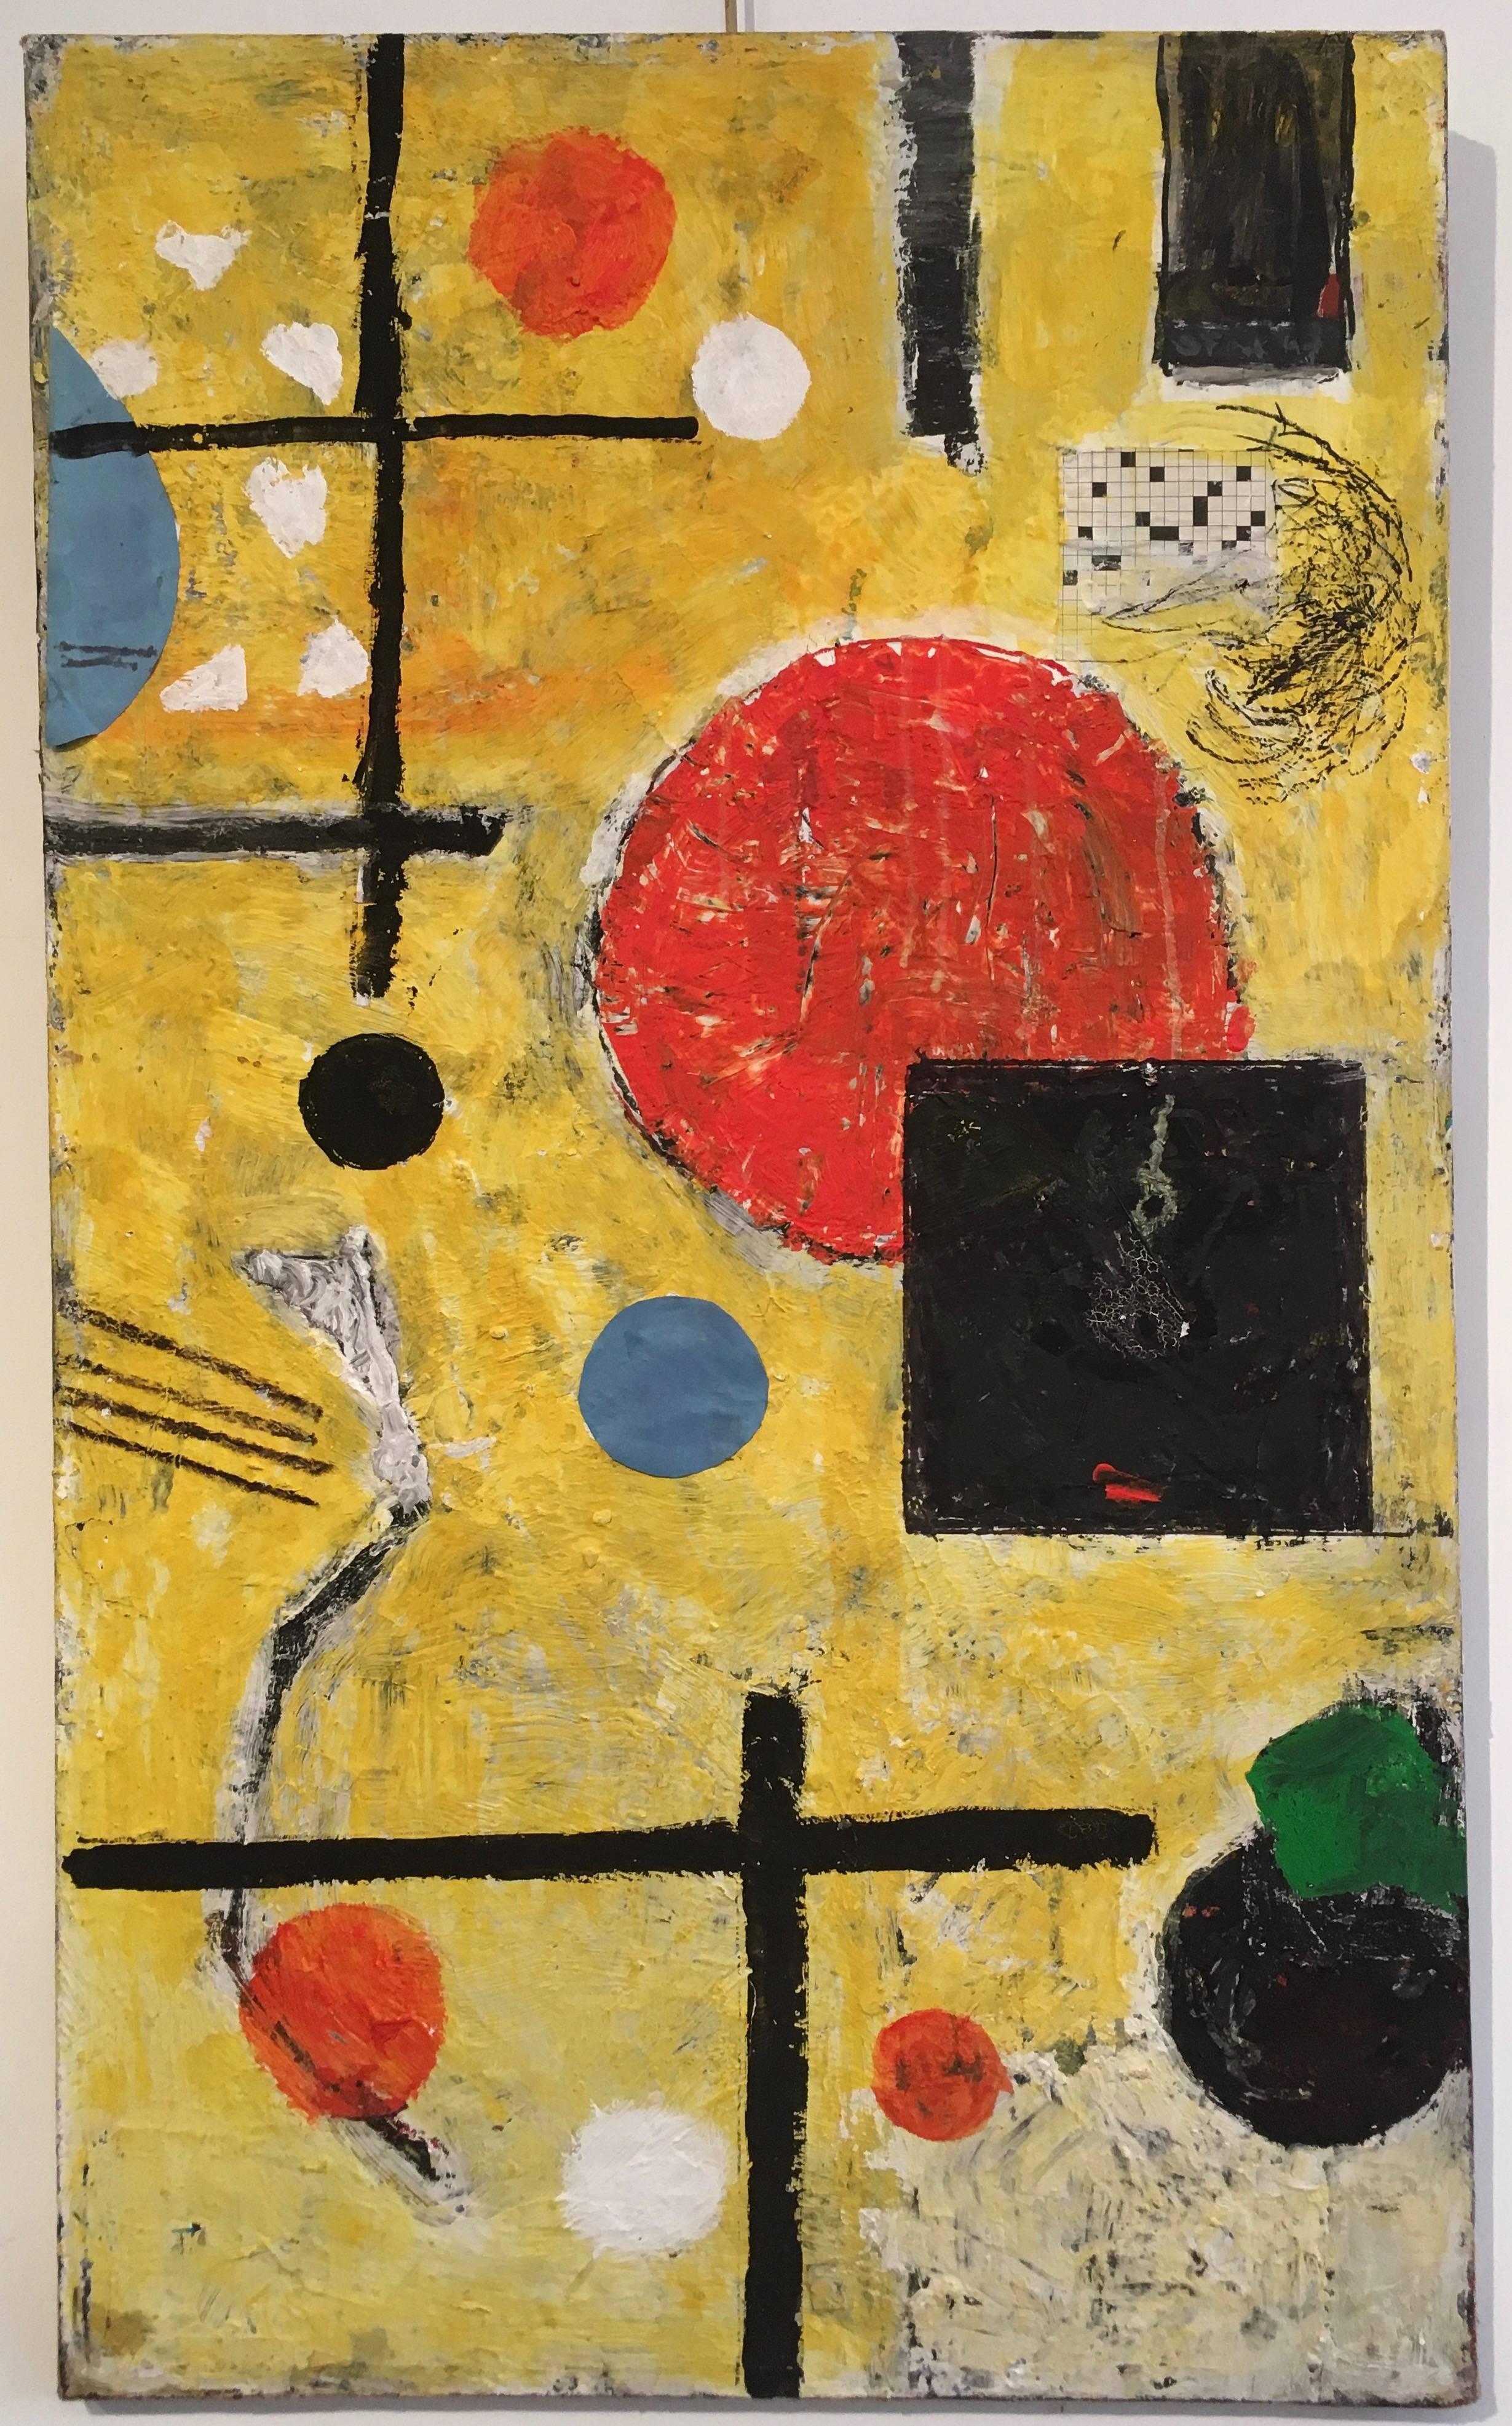 Dominique Sfax (1920-2007)

Untitled (Yellow)
Mixed-media on canvas 

Measures: 100 x 60 cm 
Signed upper right : SFAX